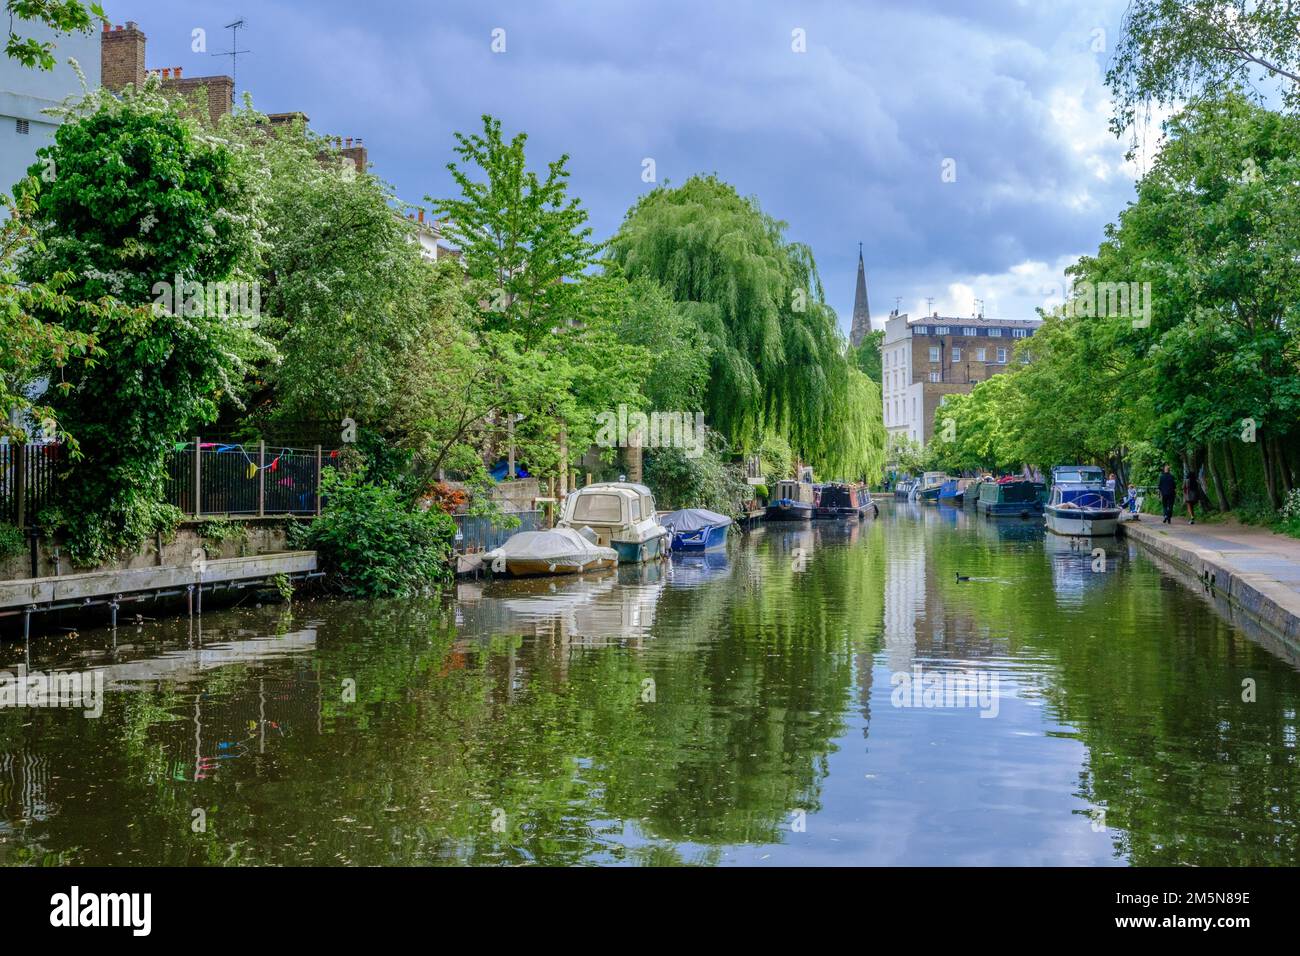 Boats docked on both sides of Regent’s Canal between Gloucester Ave & Regent’s Park Road, London. Spring foliage & trees give a serene atmosphere. Stock Photo